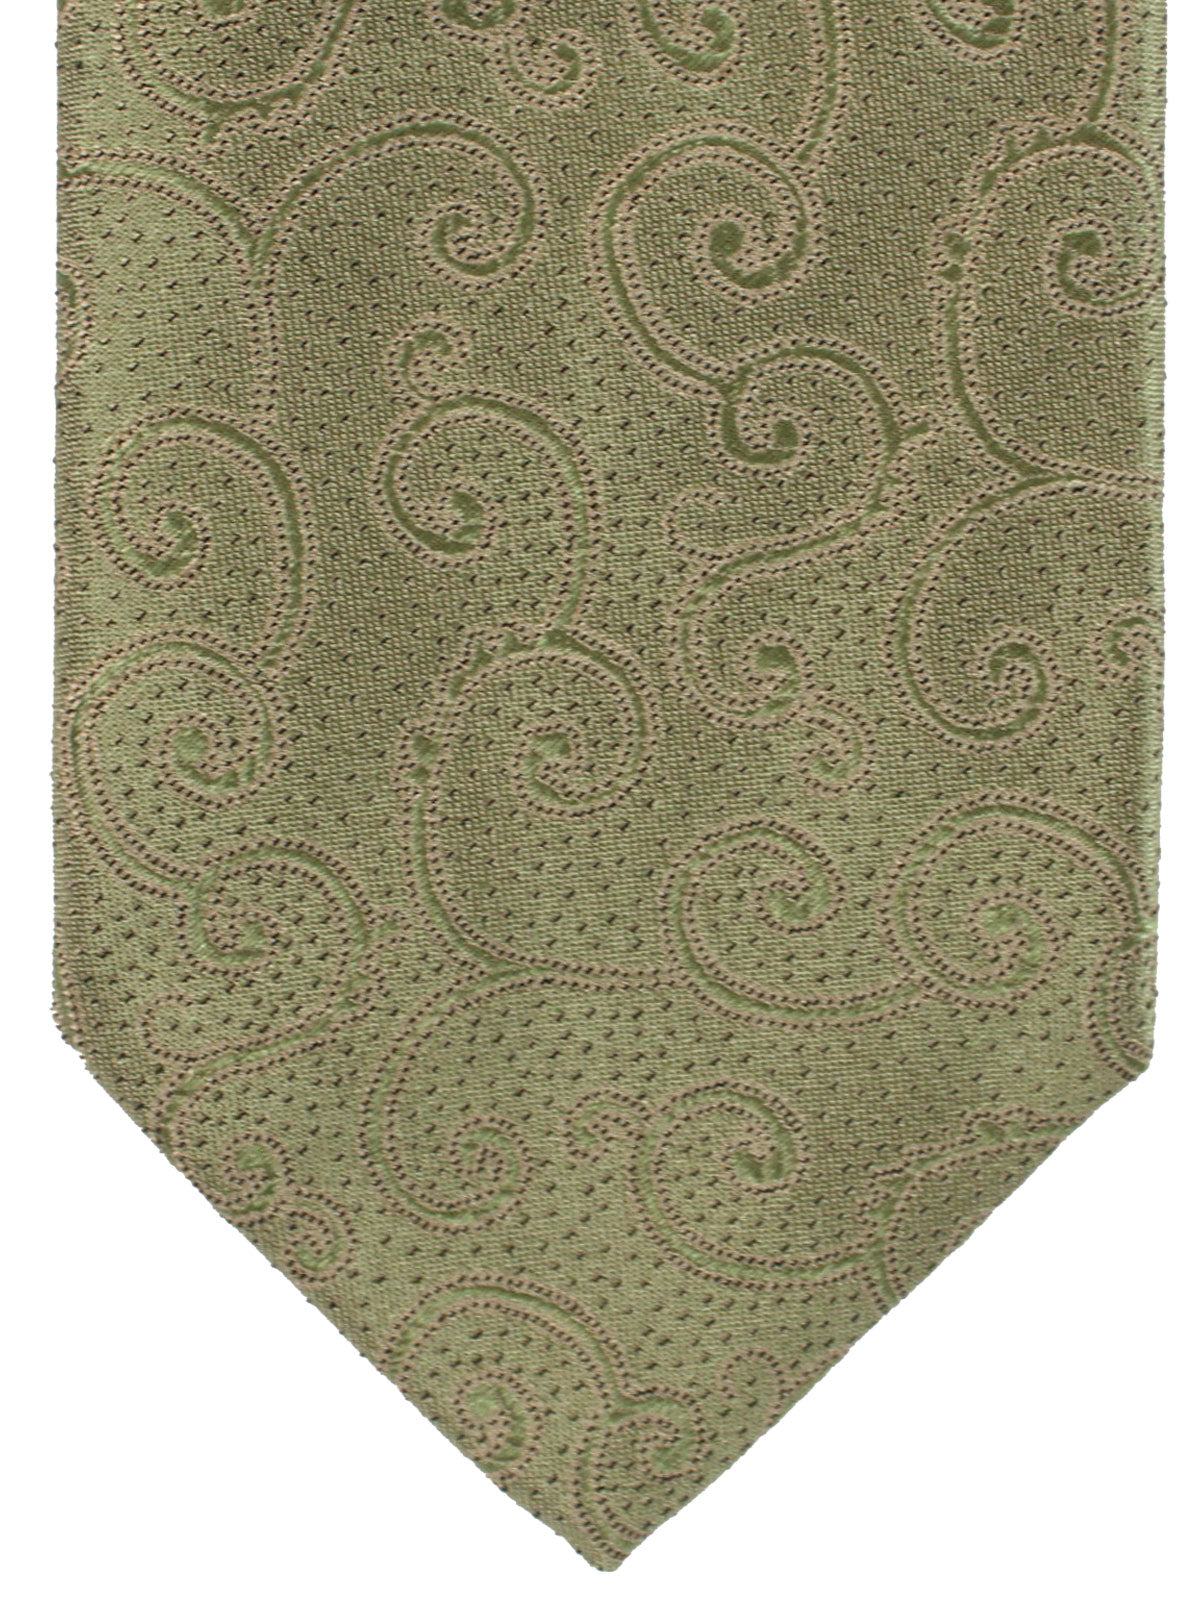 Brioni Silk Tie Forest Green Paisley